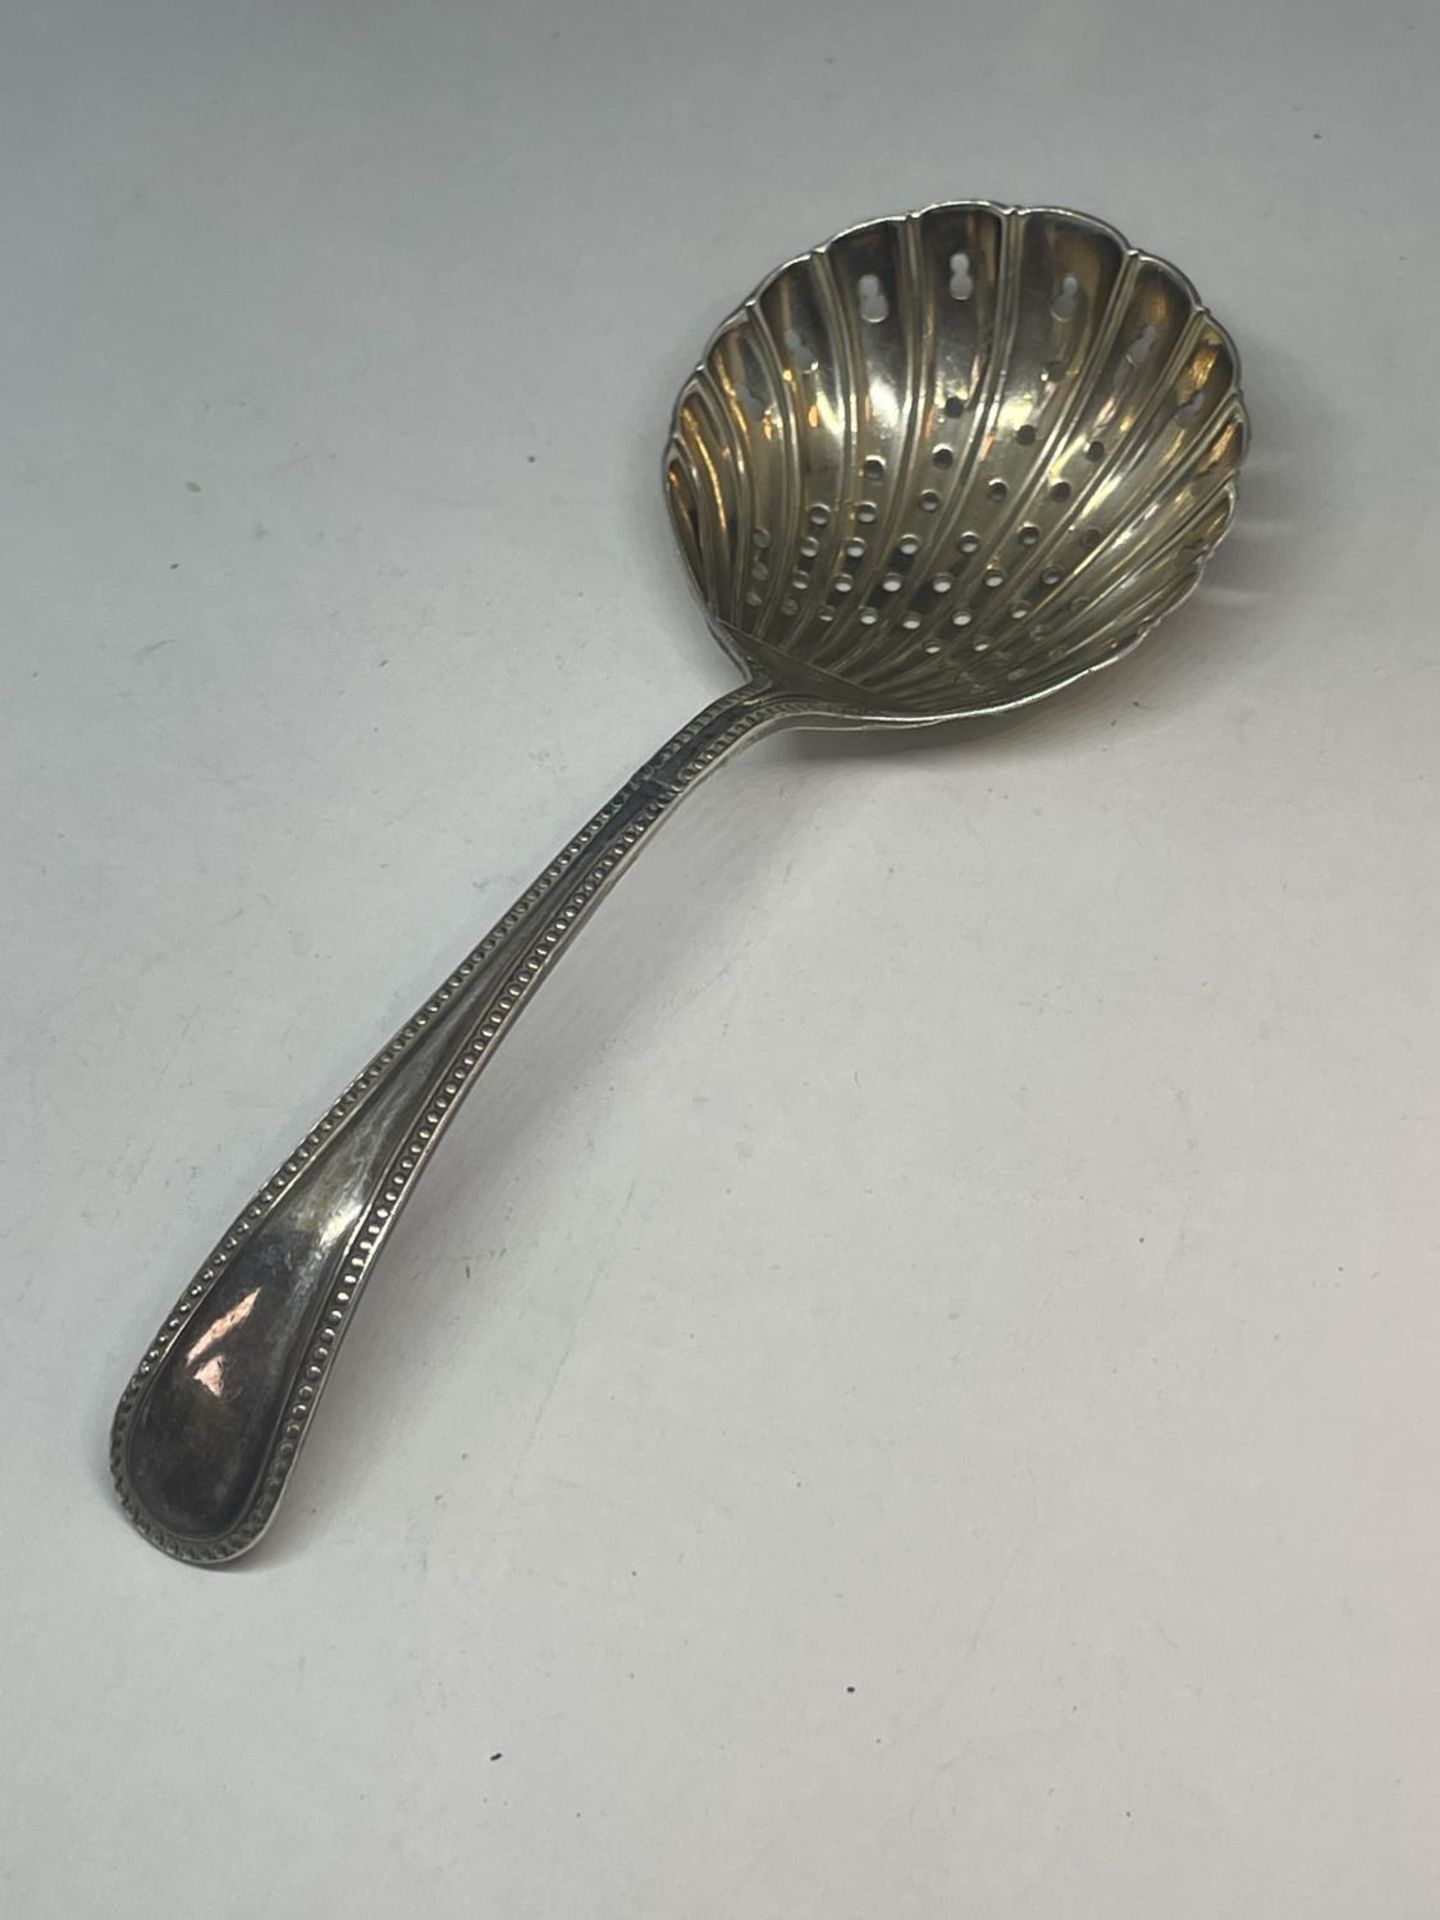 A HALLMARKED SHEFFIELD SILVER TEA STRAINER GROSS WEIGHT 41.5 GRAMS - Image 2 of 3